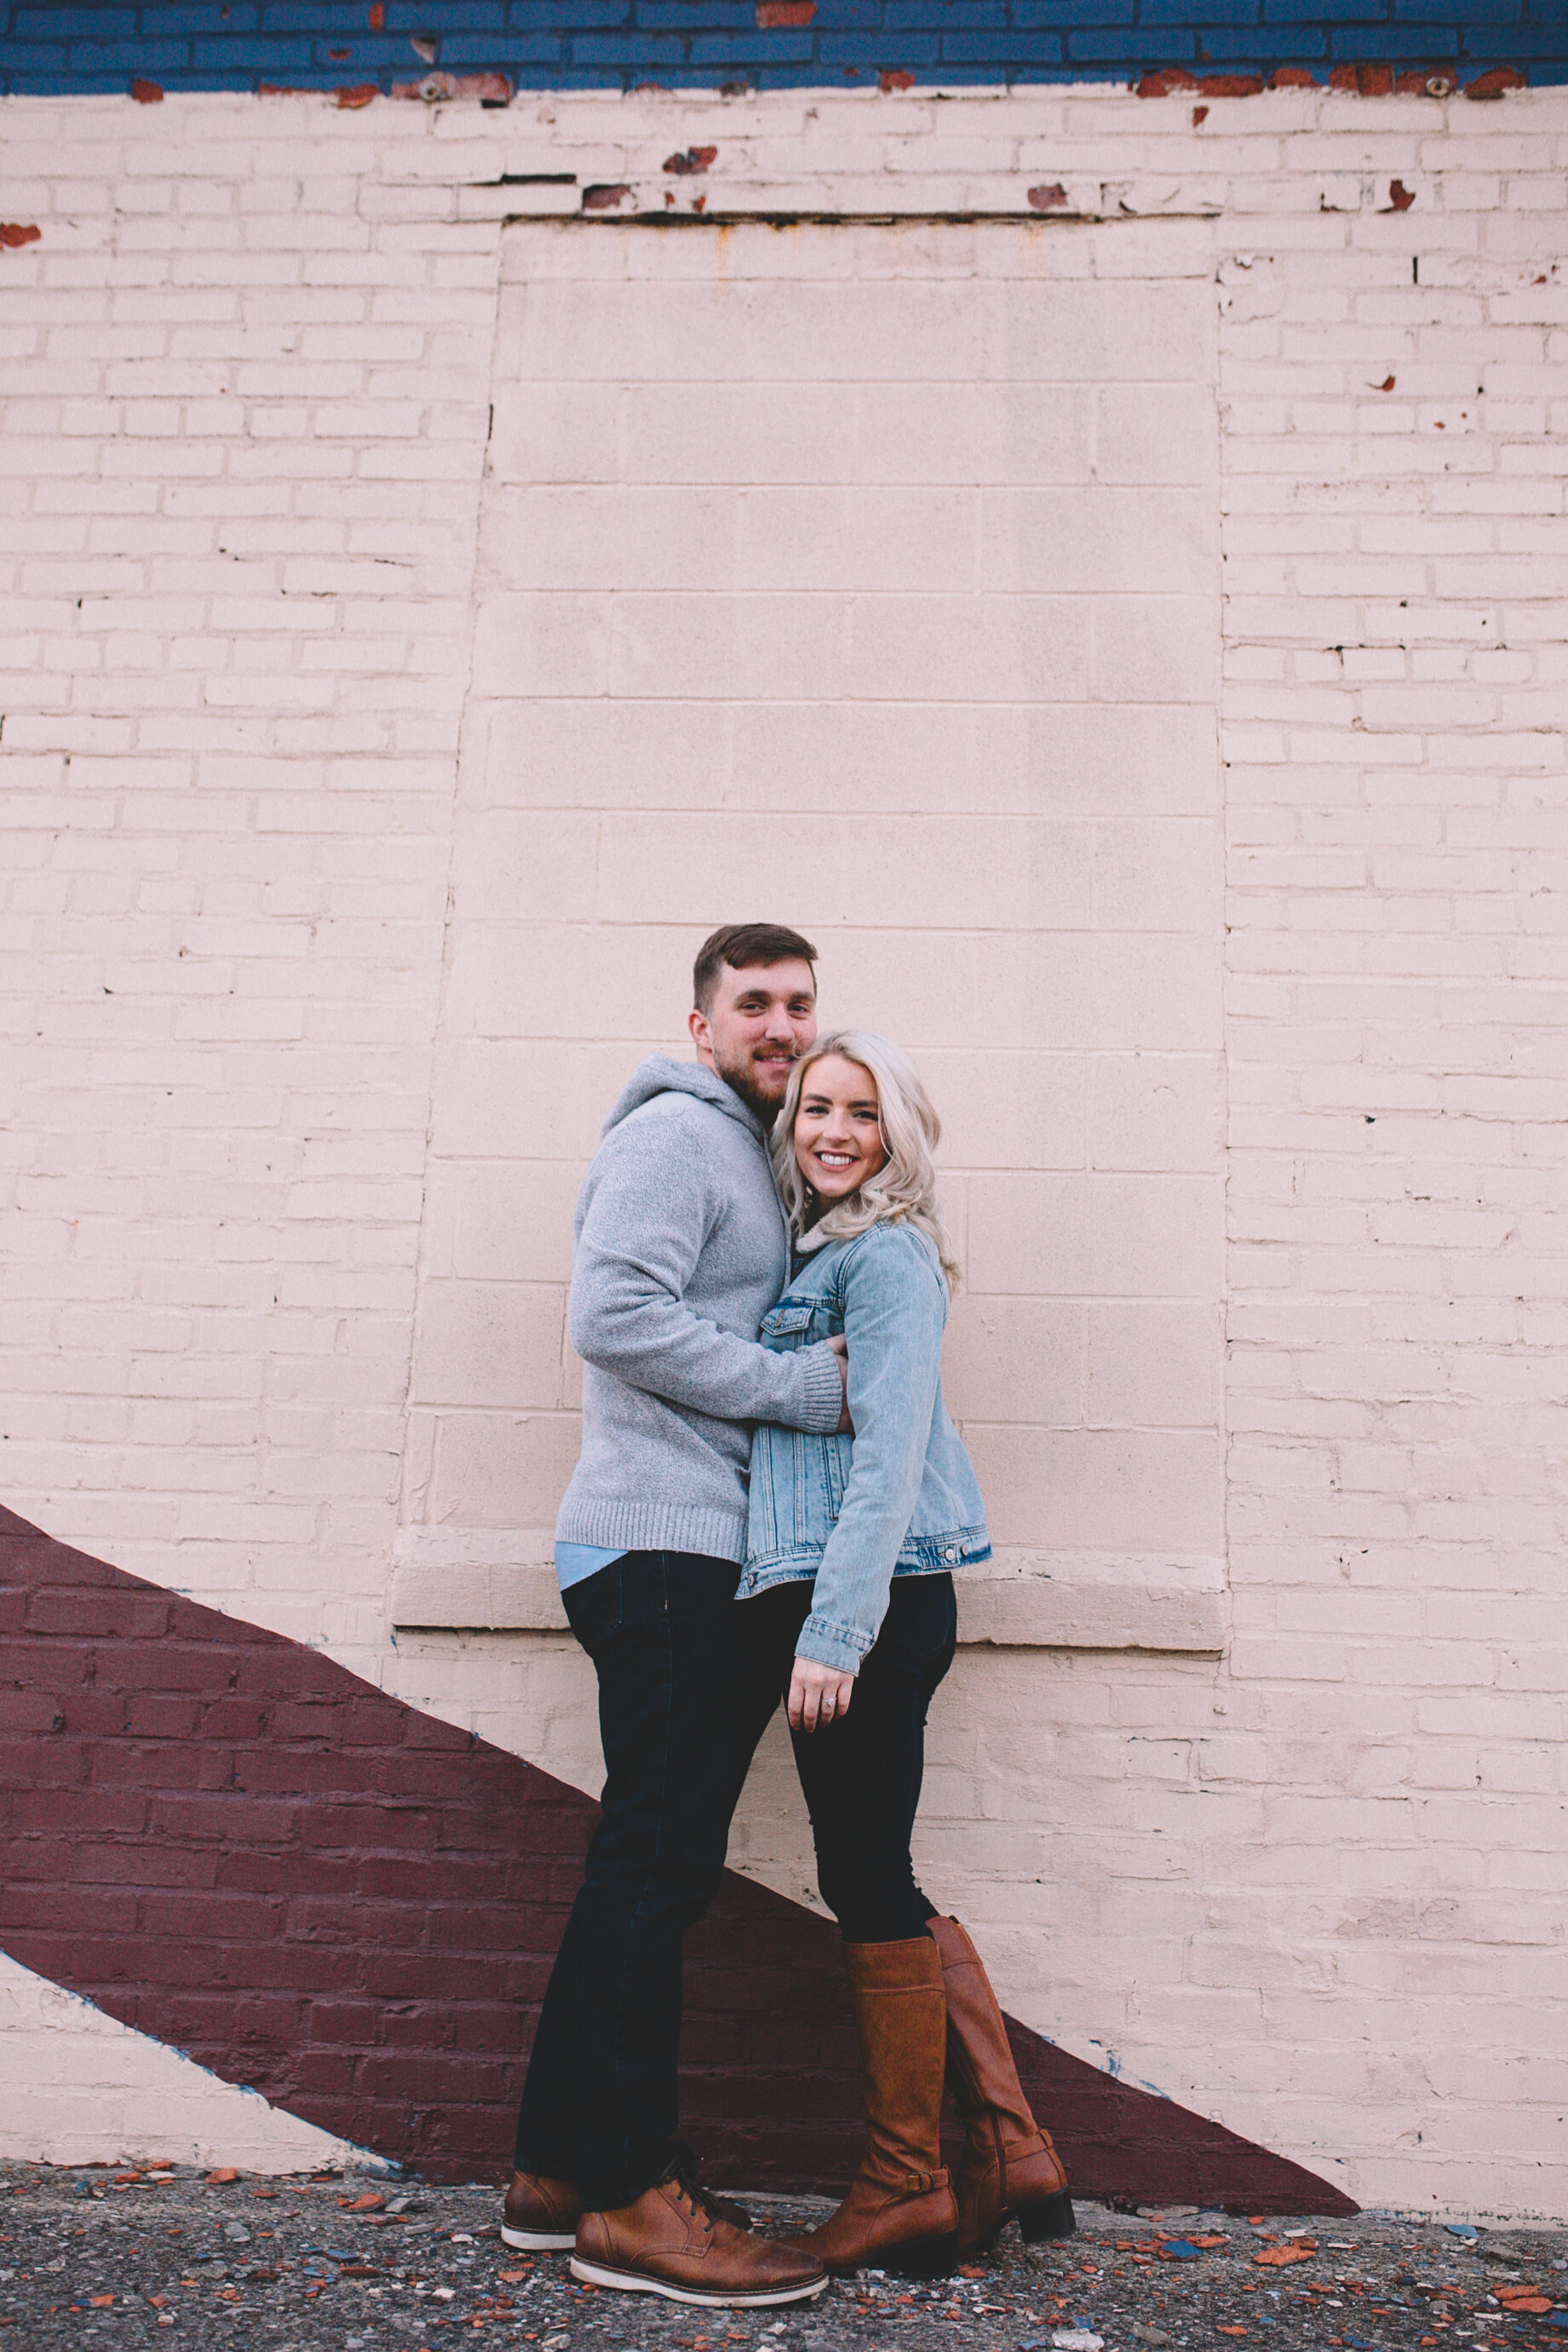 Matt + McKenah Urban Indianpolis Engagement Session By Again We Say Rejoice Photography   (66 of 91).jpg